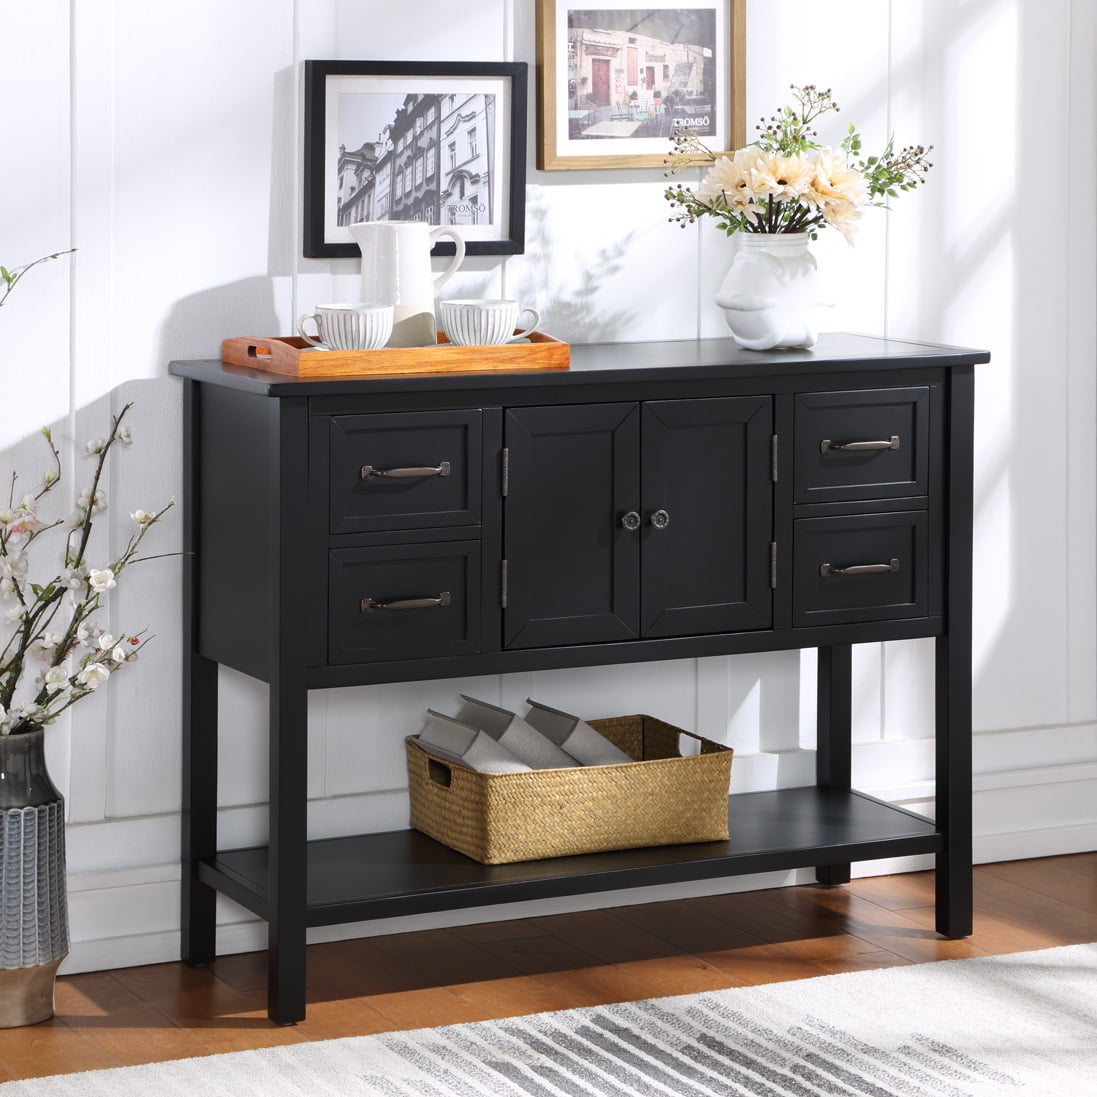 Details about   Modern Console Table Sofa with 4 Drawer Open Shelves cabinets Sofa Side Table 